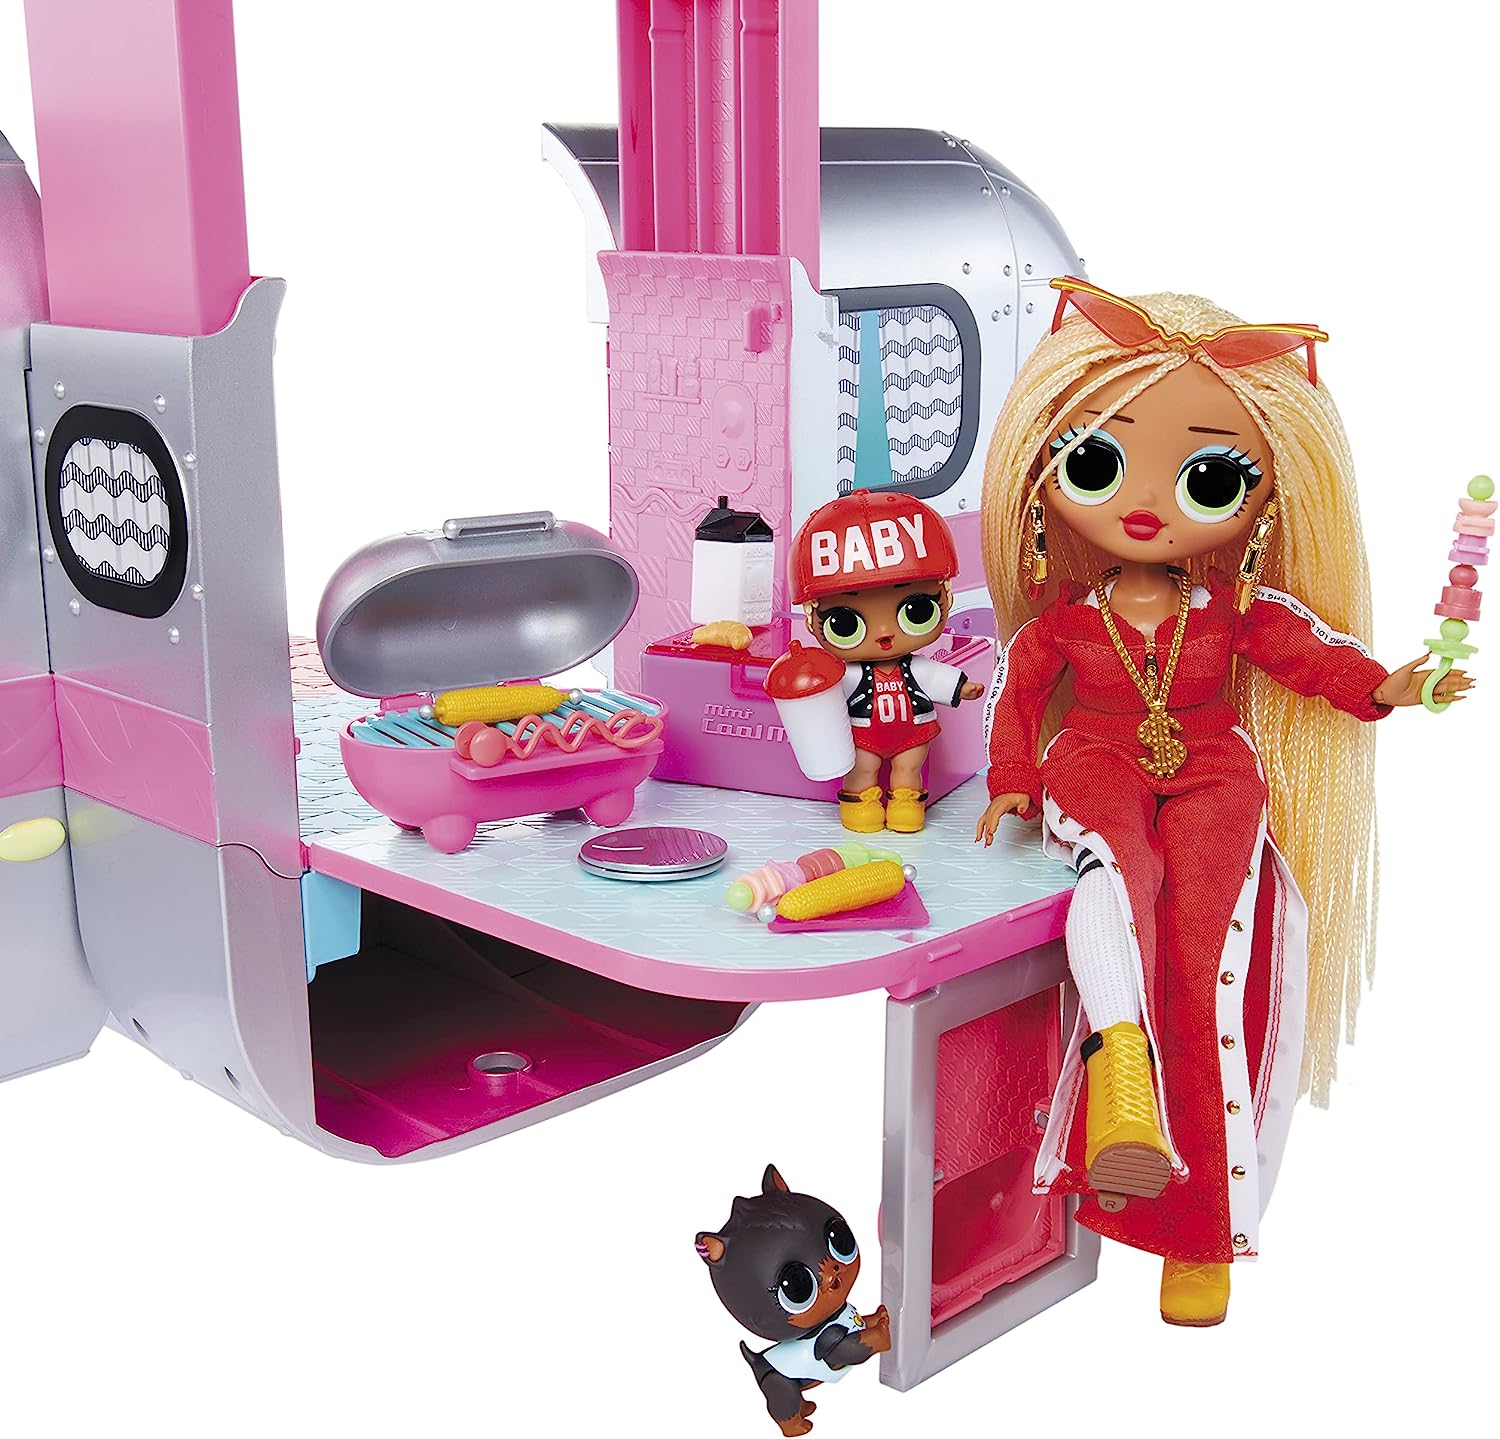 LOL Surprise OMG Glamper Fashion Camper Doll Playset with 55+ Surprises,  Fully-Furnished with Light Up Pool, Water Slide, Bunk Beds, Cafe, BBQ  Grill, DJ Booth - Gift Toy for Girls Ages 4